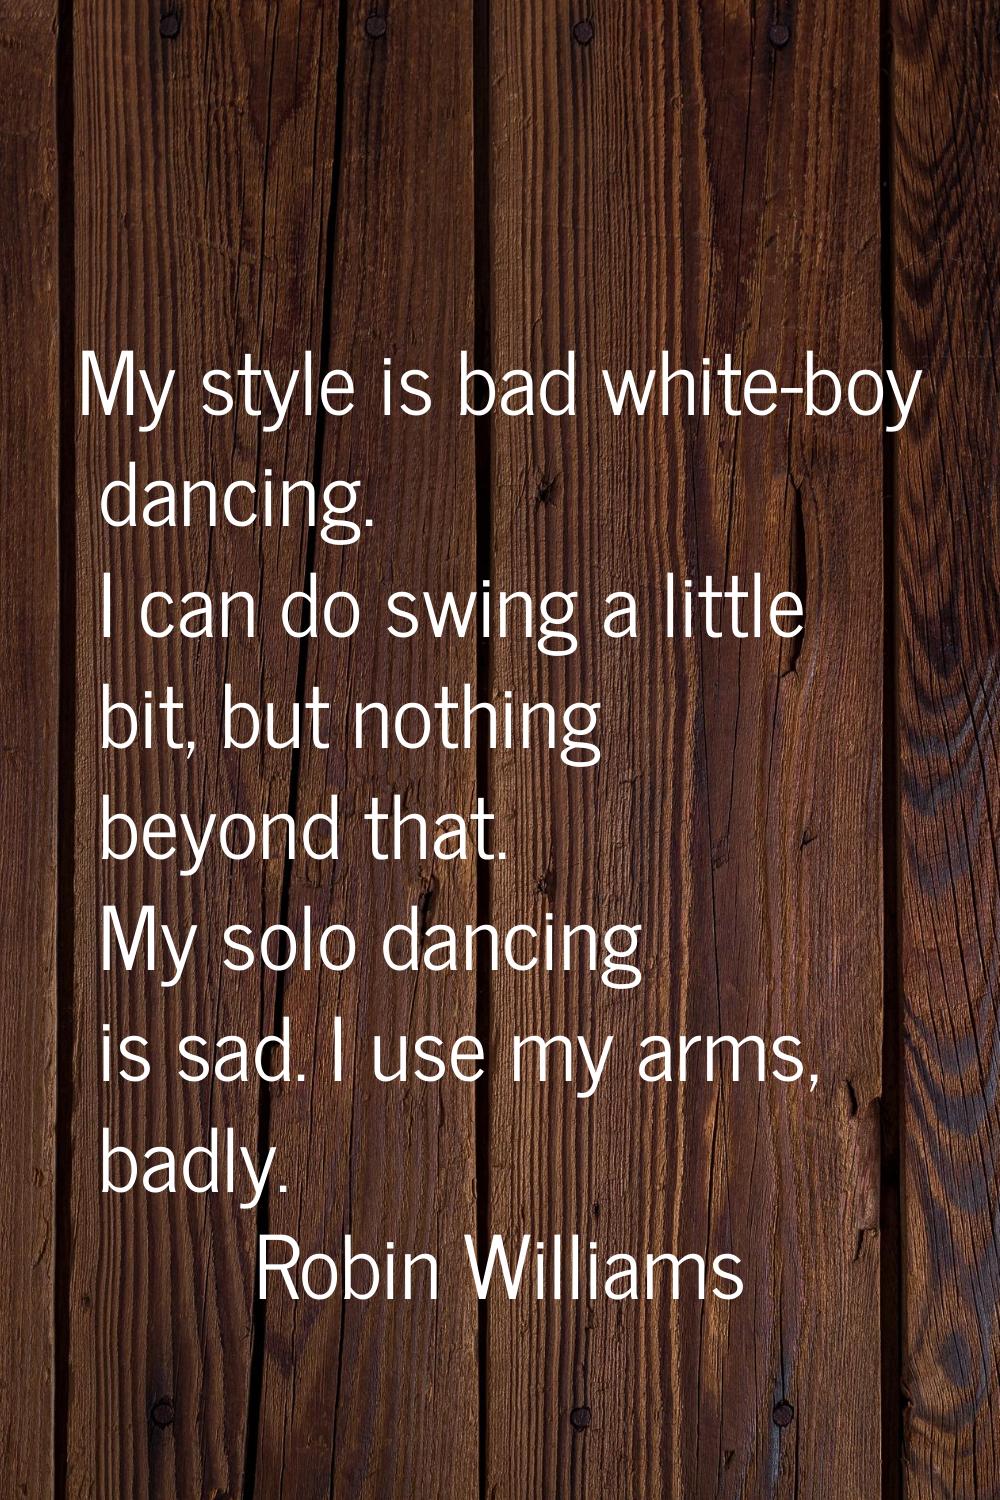 My style is bad white-boy dancing. I can do swing a little bit, but nothing beyond that. My solo da